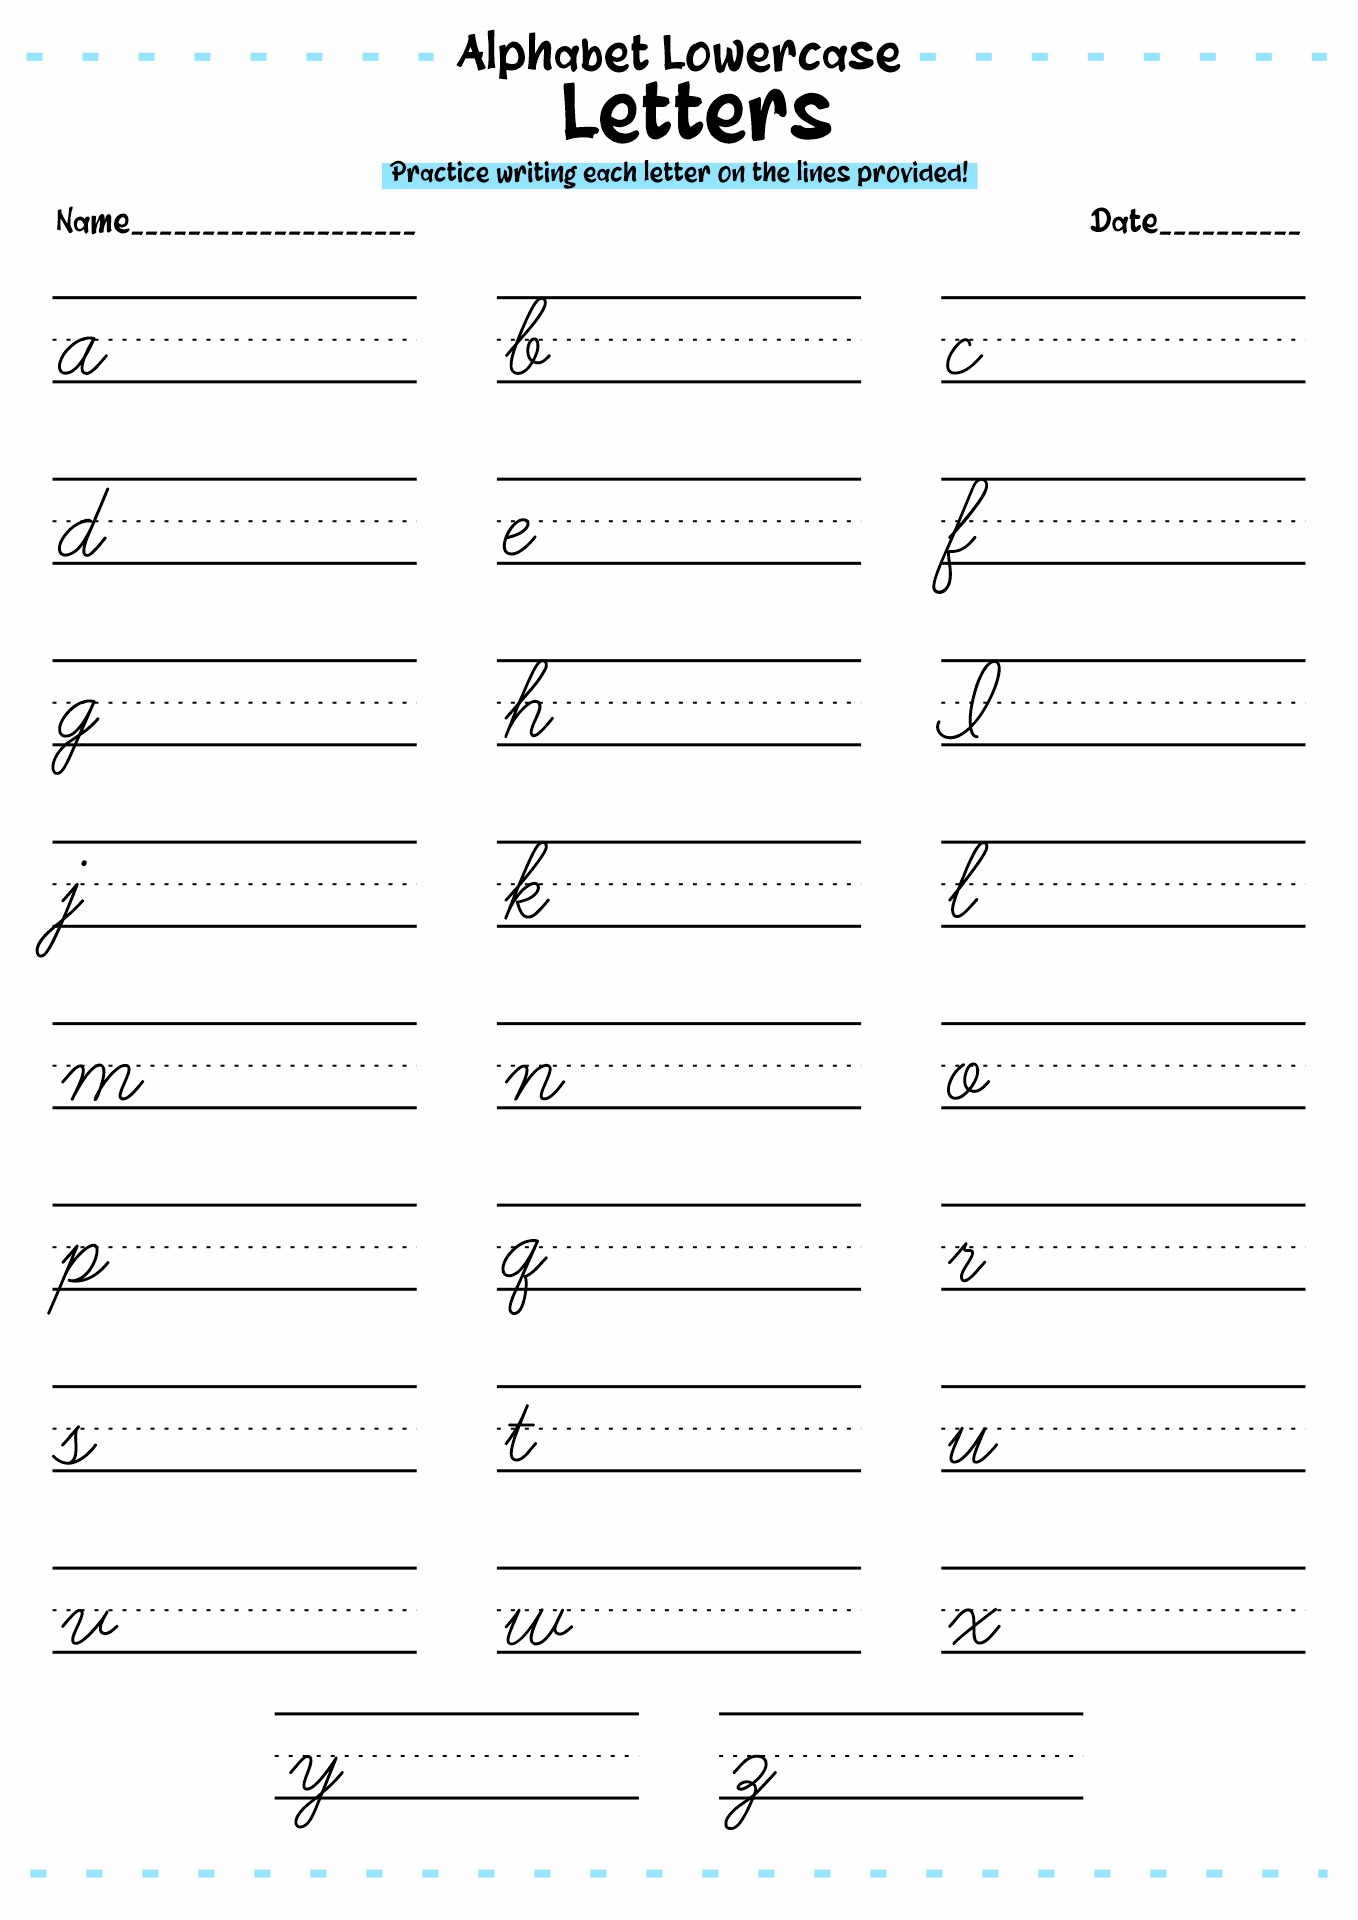 Practice Writing Lowercase Letters Image